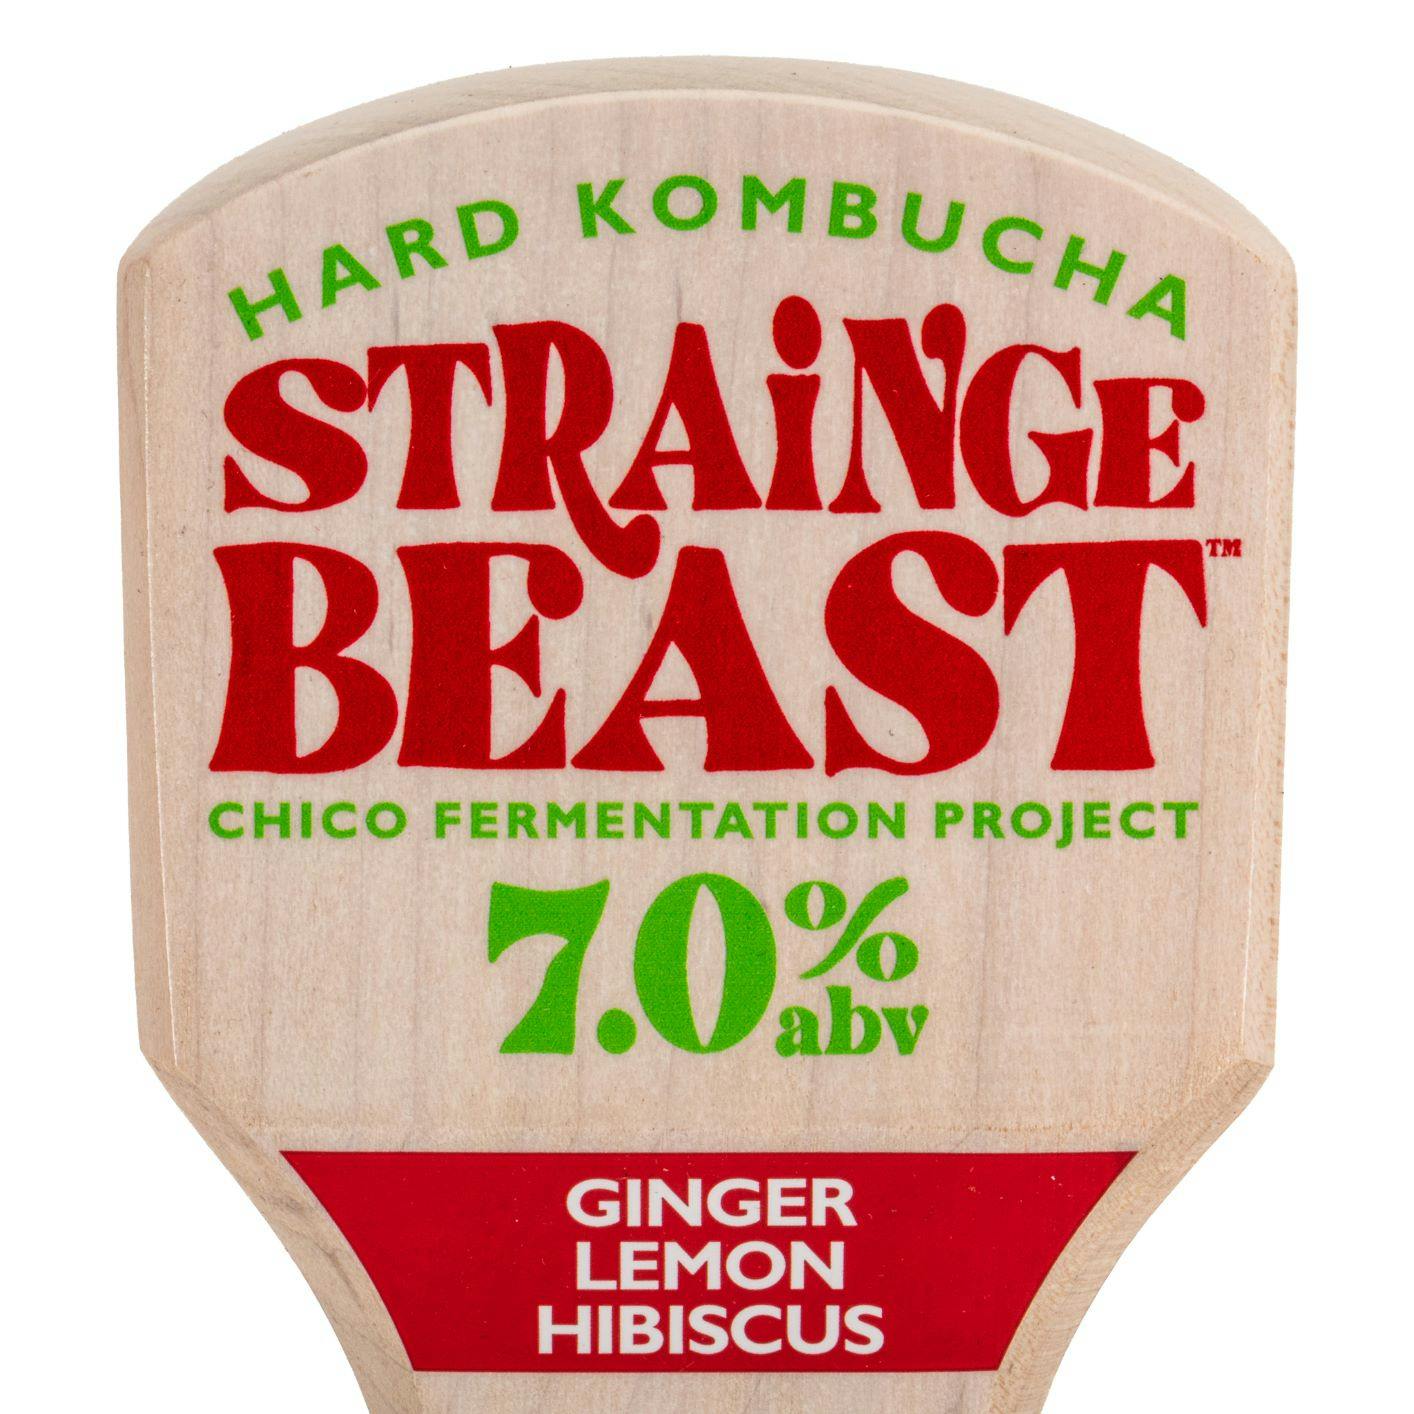 Sierra Nevada Brewing Co. Strainge Beast tap handle - close-up, straight-on view of the top of the tap handle with the Strainge Beast Hard Kombucha logo